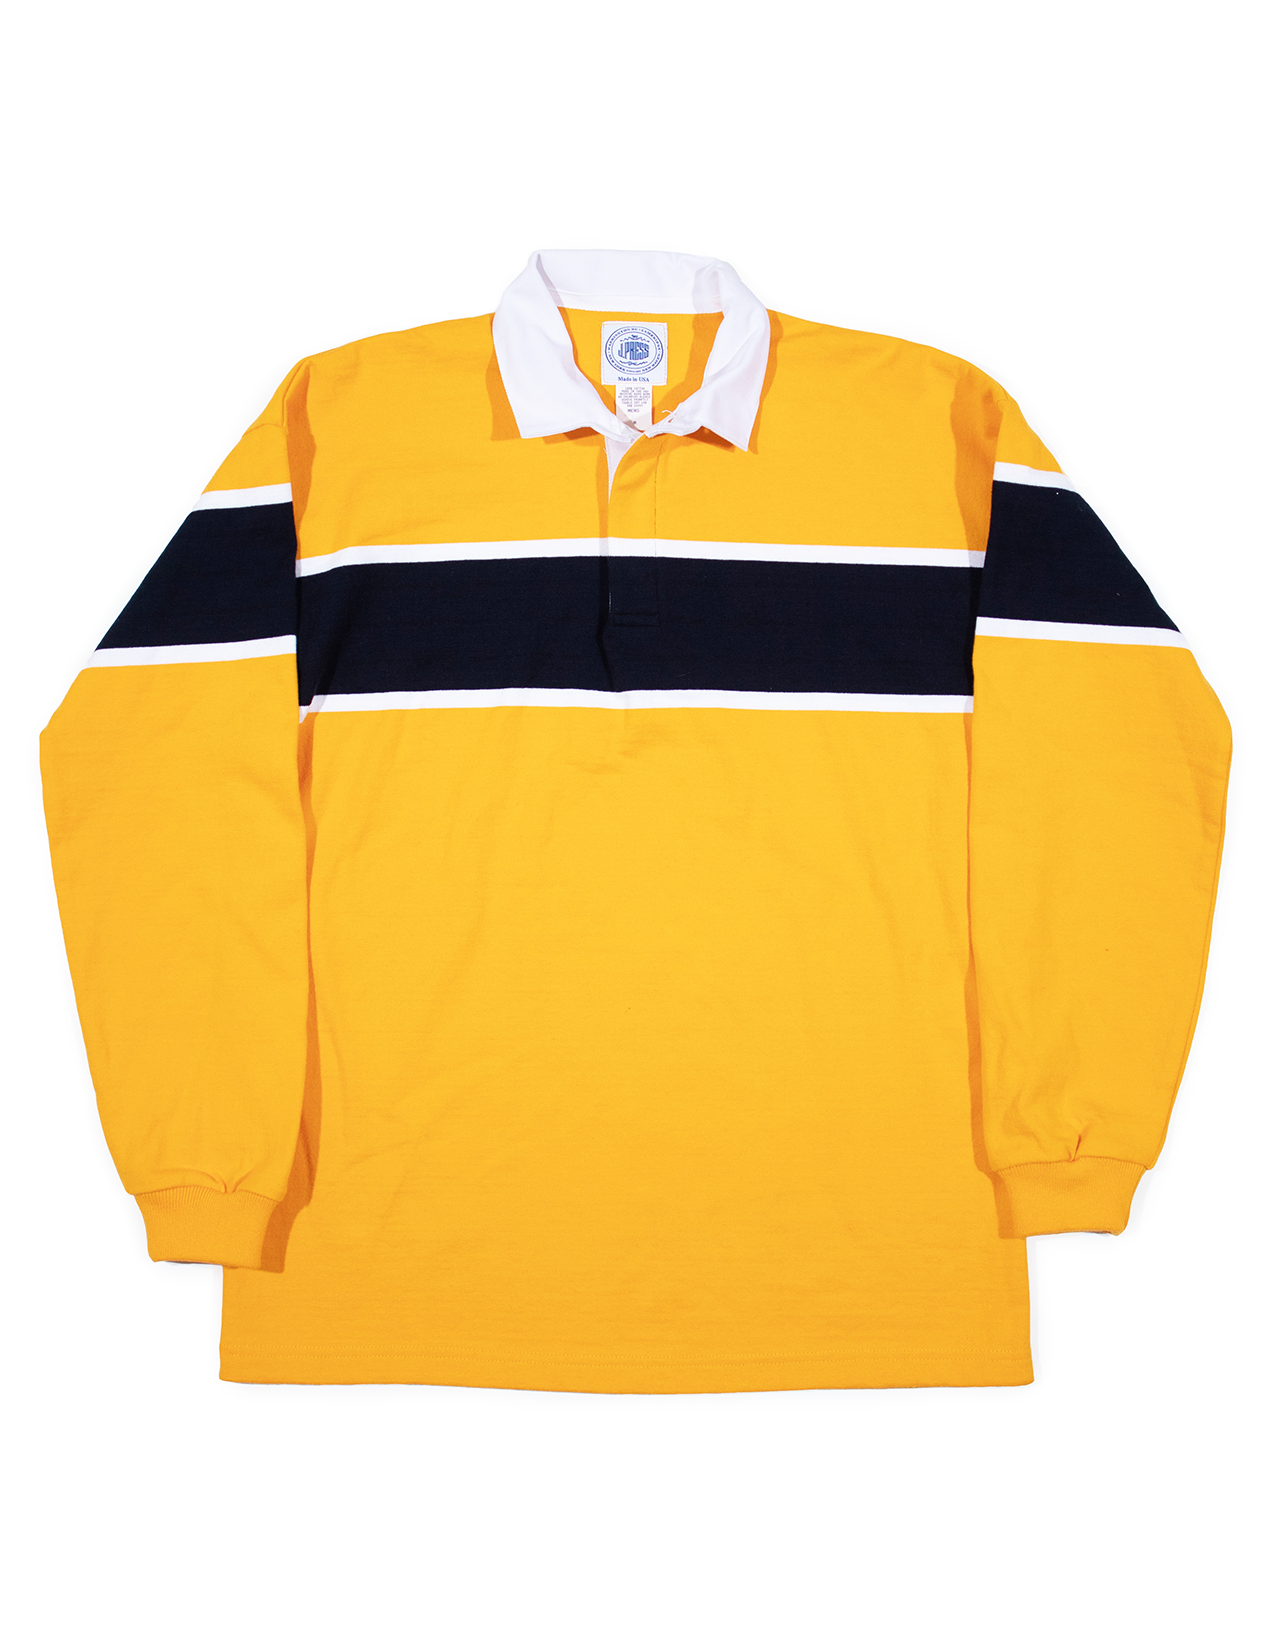 STRIPED RUGBY SHIRT - GOLD/WHITE/NAVY